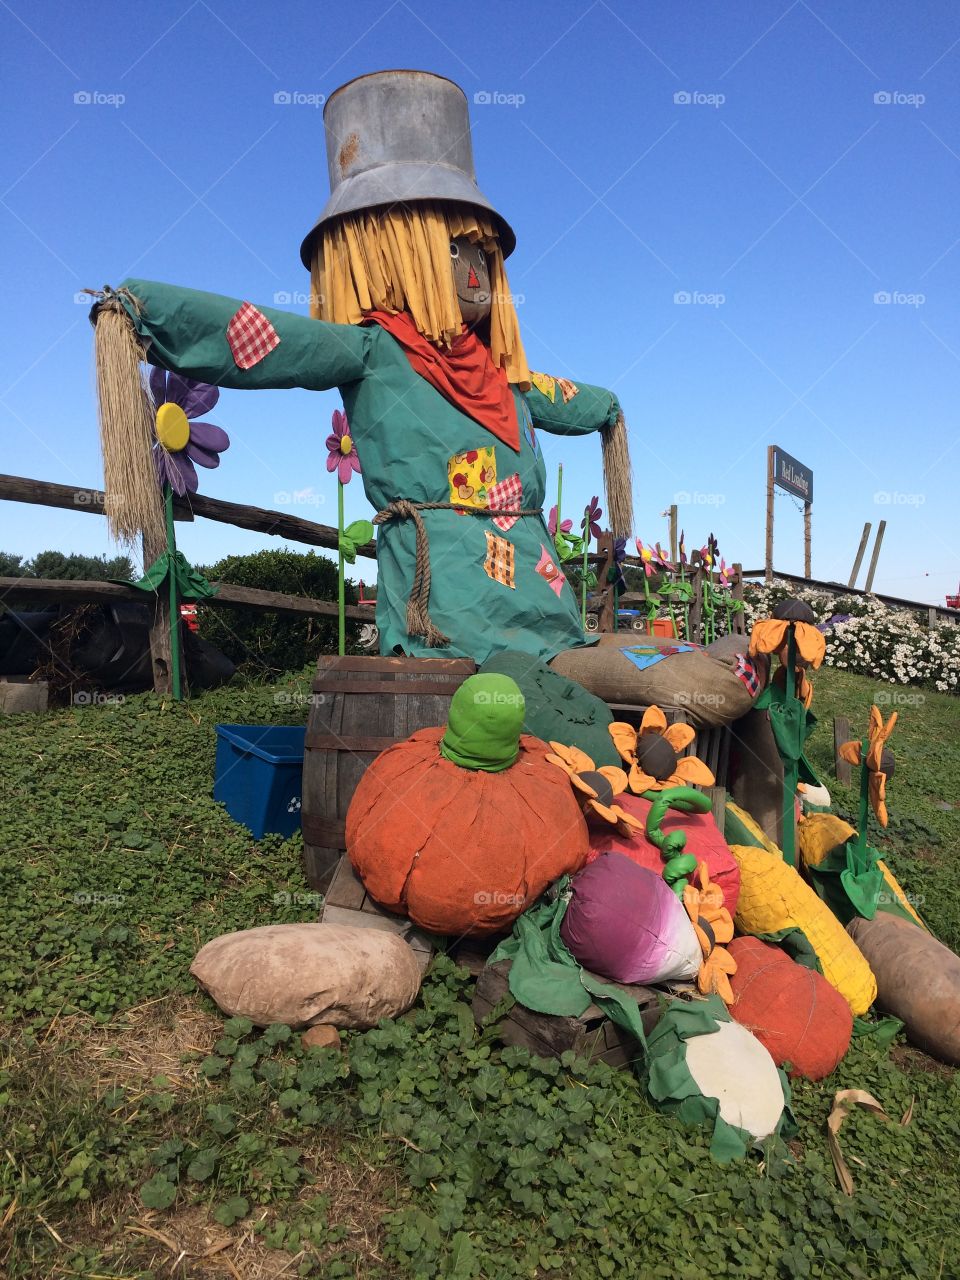 Giant scarecrow at the pumpkin patch on a beautiful blue sky autumn day.